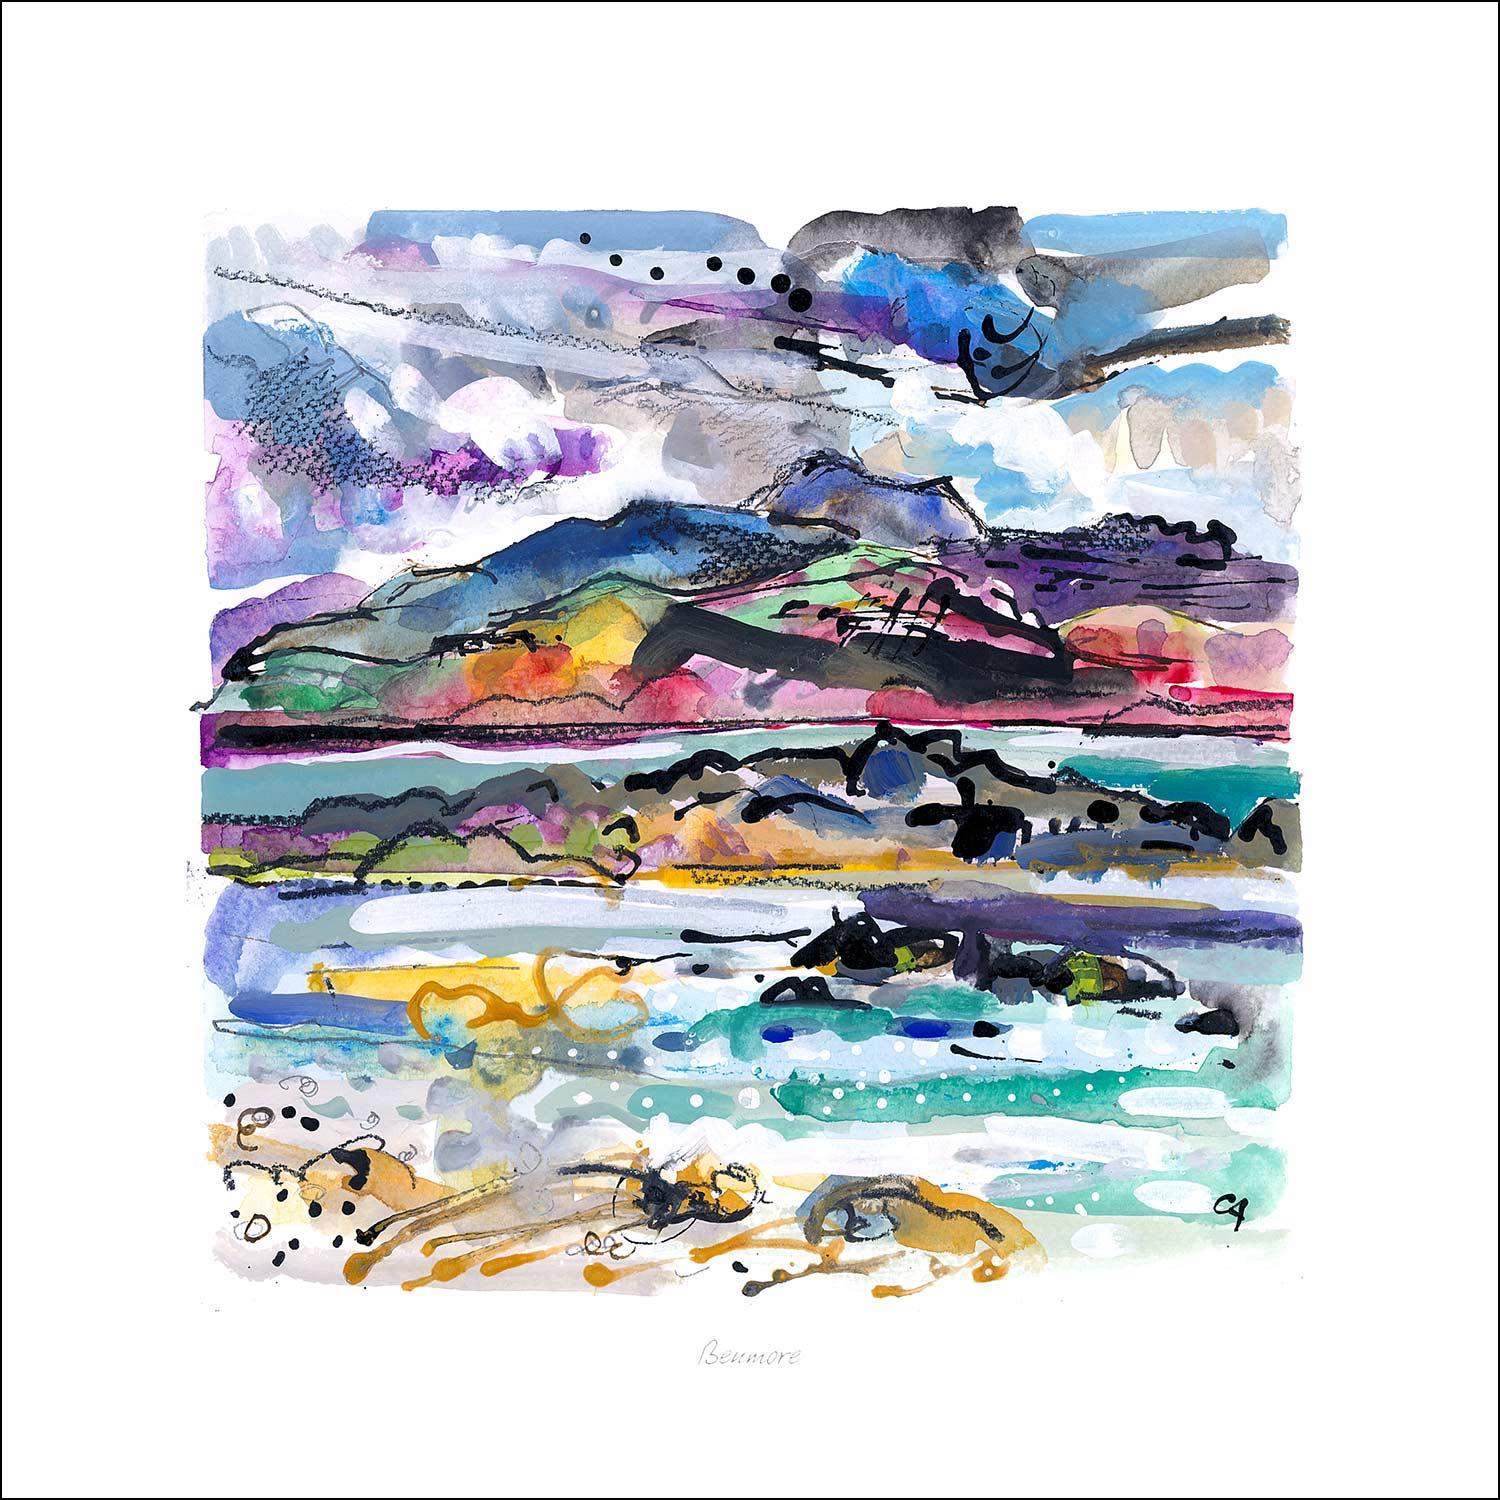 Benmore from Iona Art Print from an original painted by artist Clare Arbuthnott